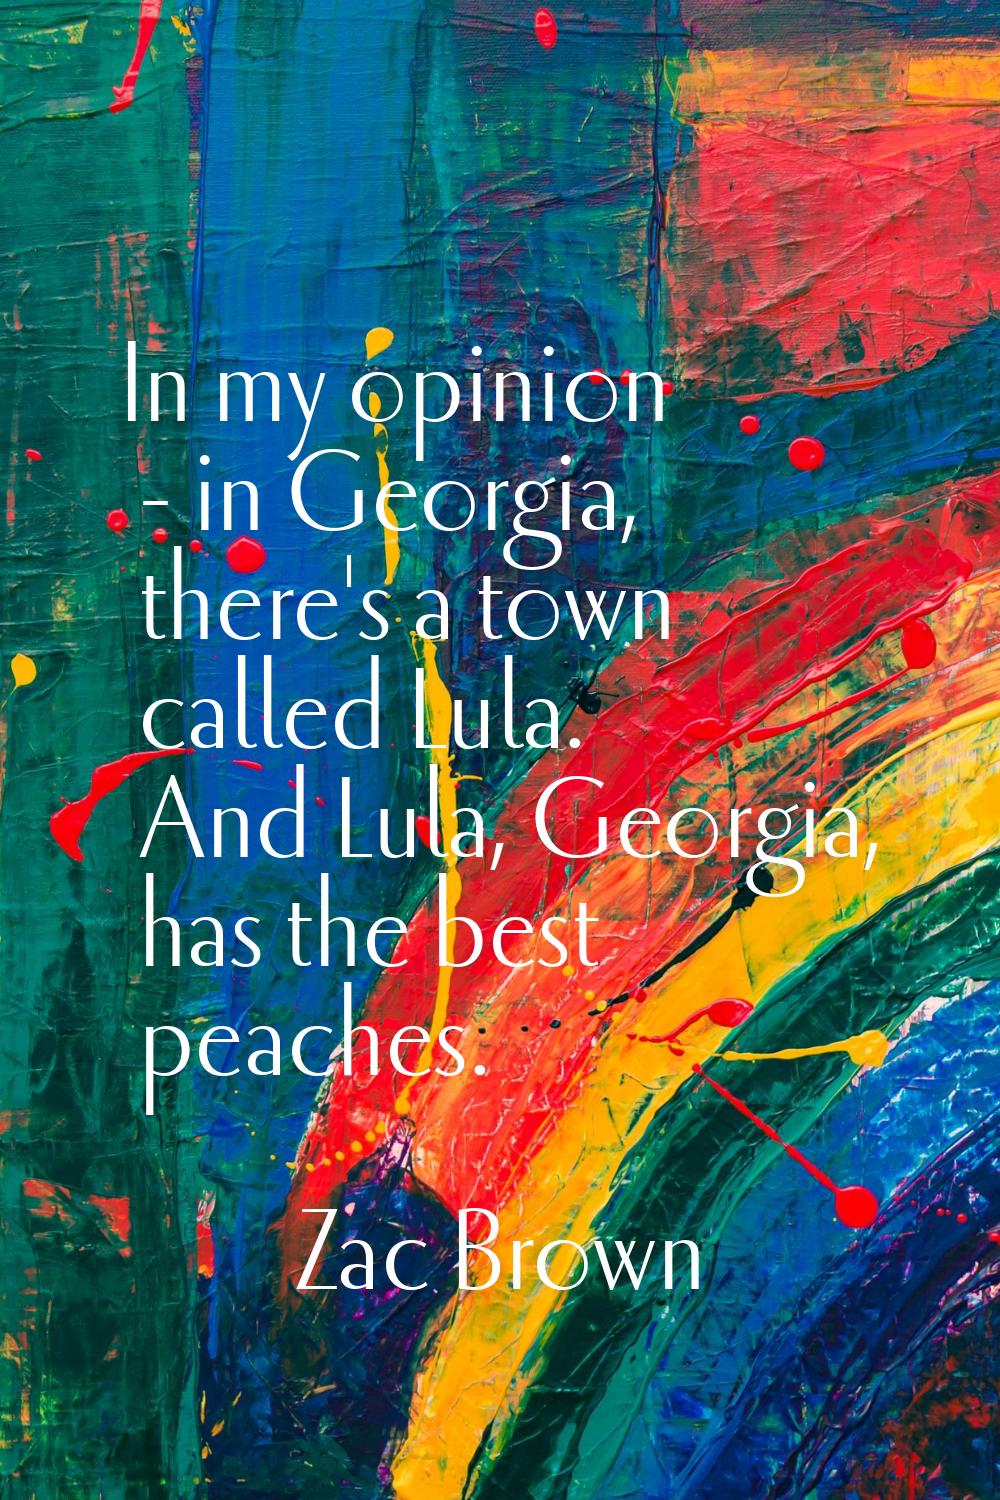 In my opinion - in Georgia, there's a town called Lula. And Lula, Georgia, has the best peaches.